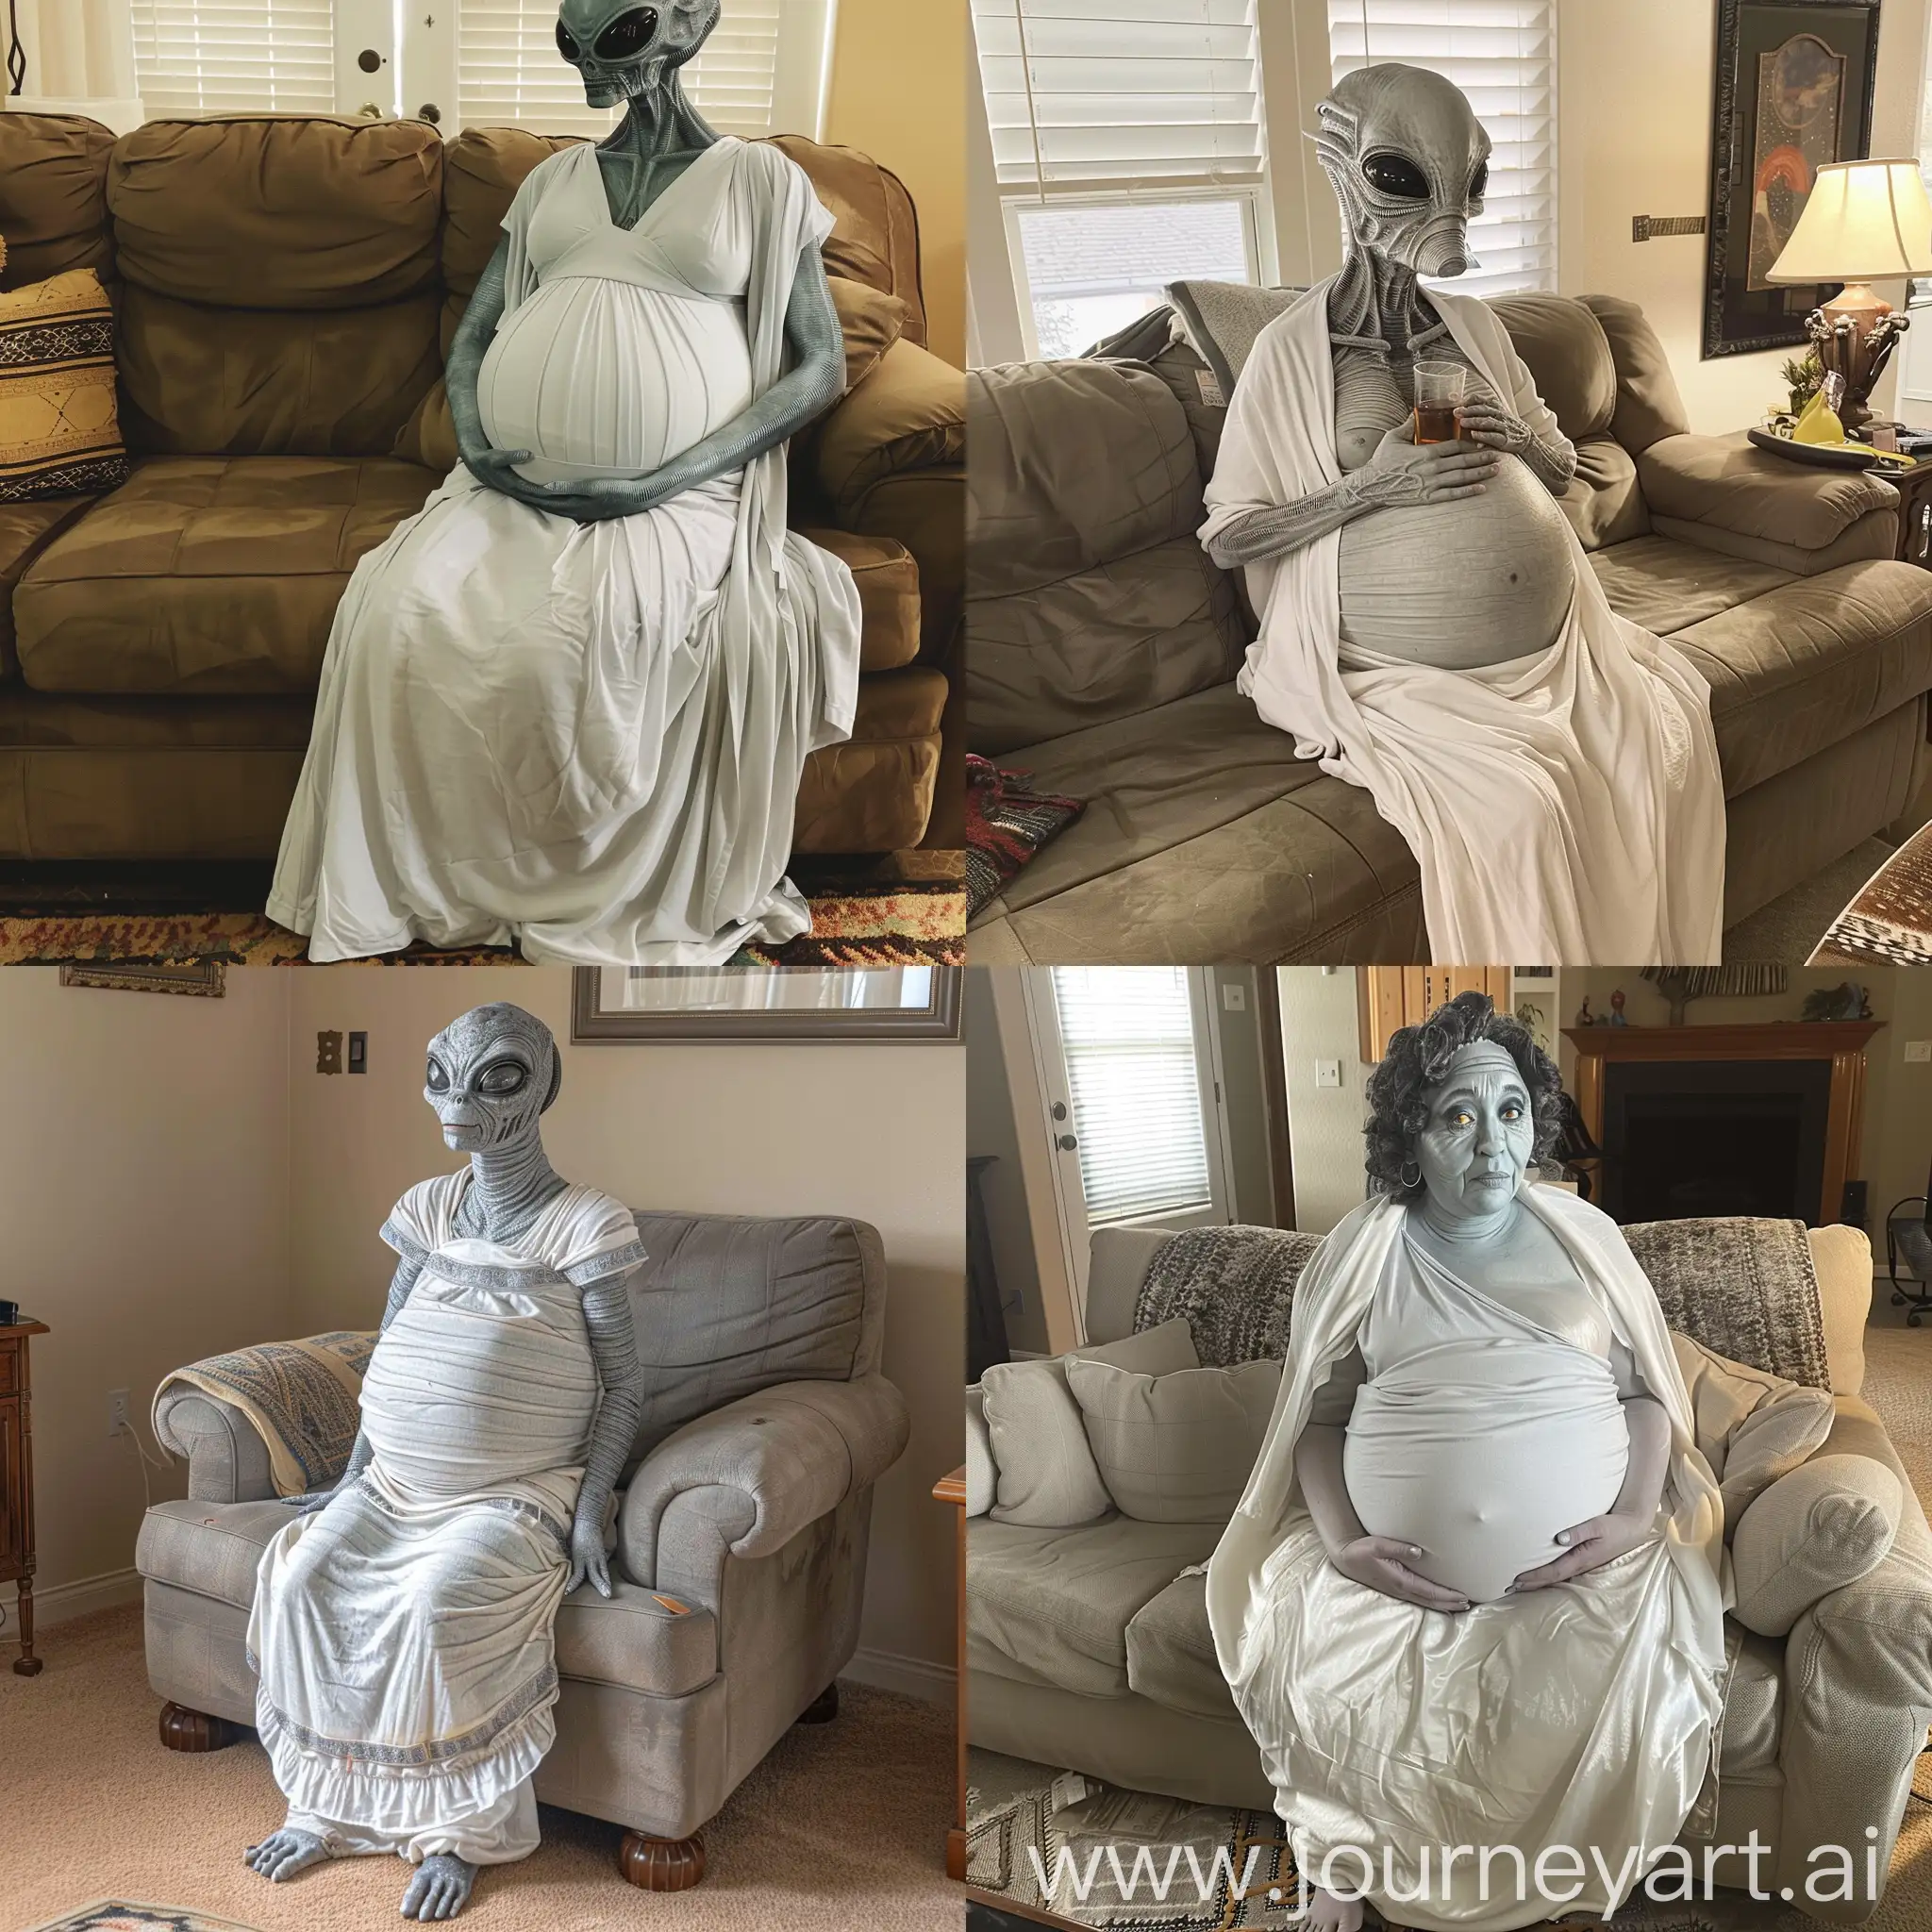 Pregnant-Gray-Alien-Expecting-Triplets-in-White-Toga-on-Living-Room-Couch